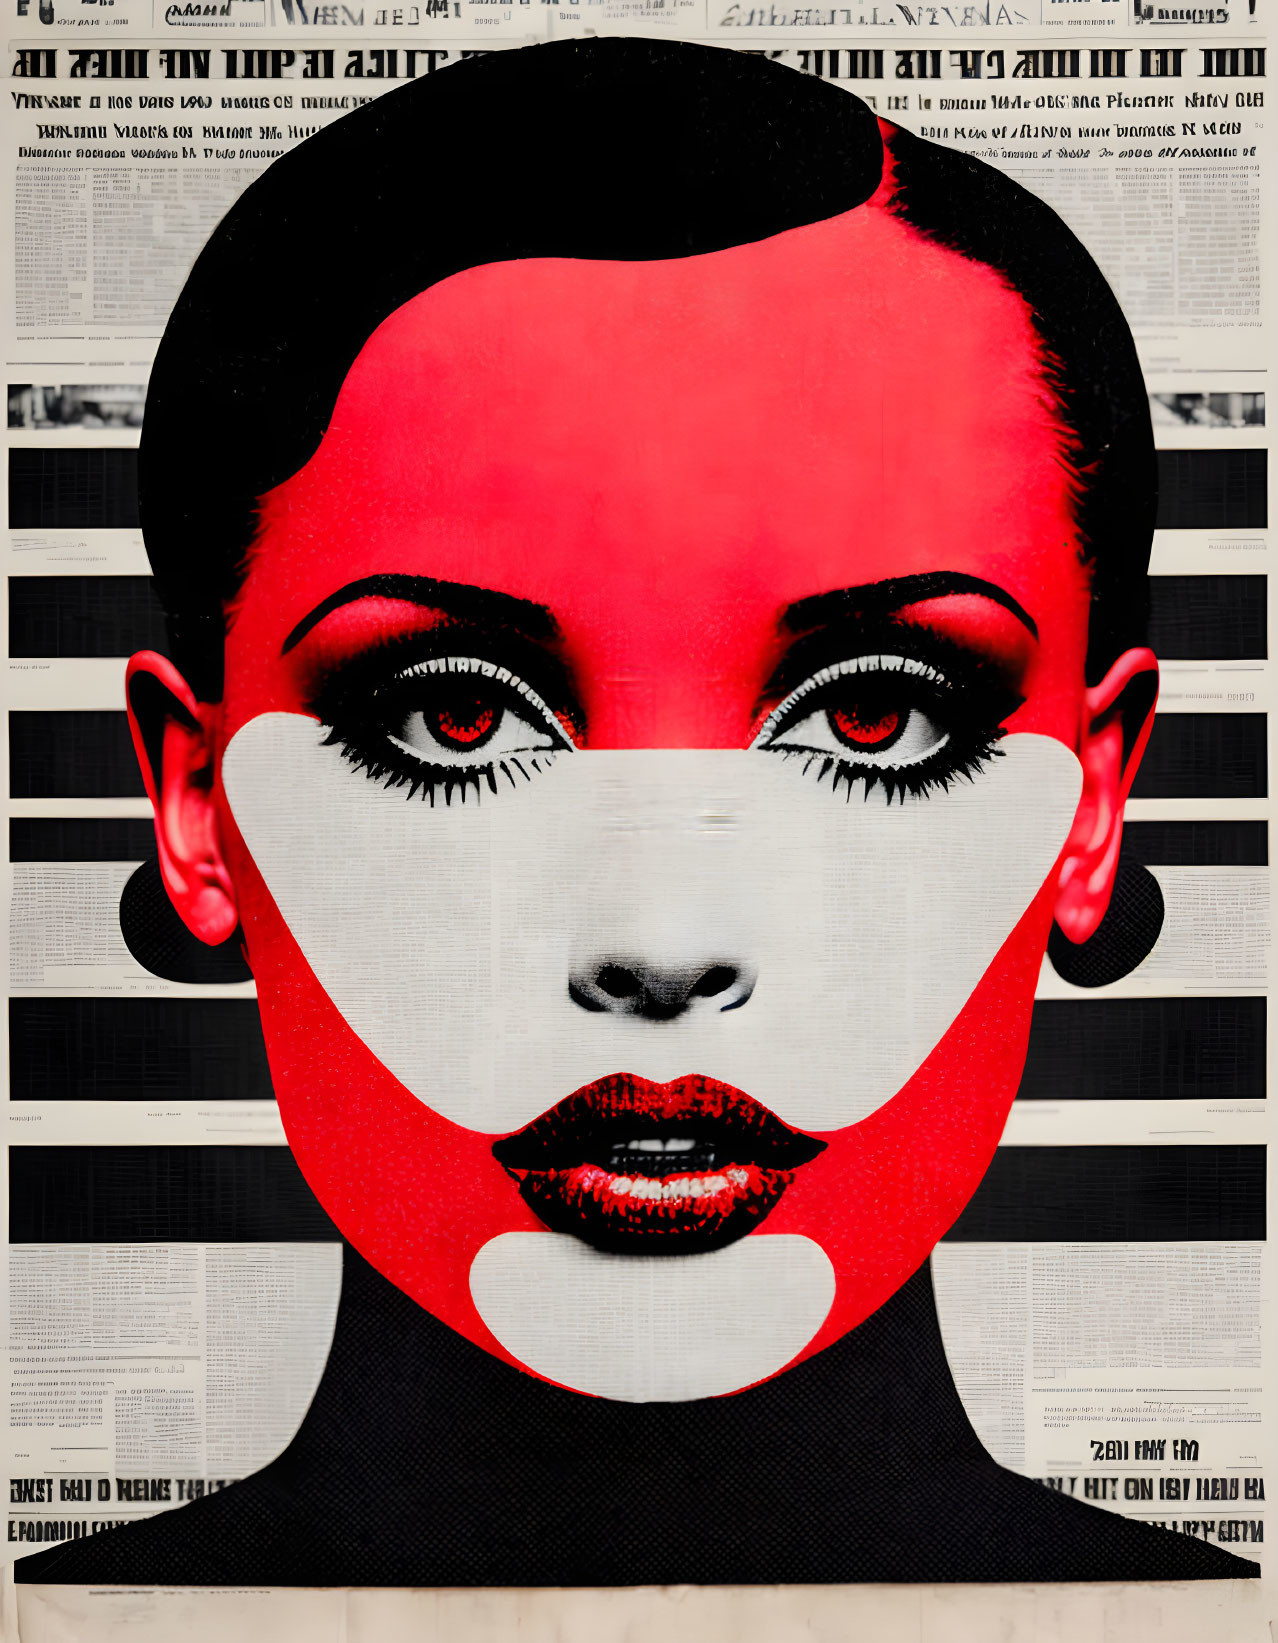 Stylized female face with red lips in black and white pop art style